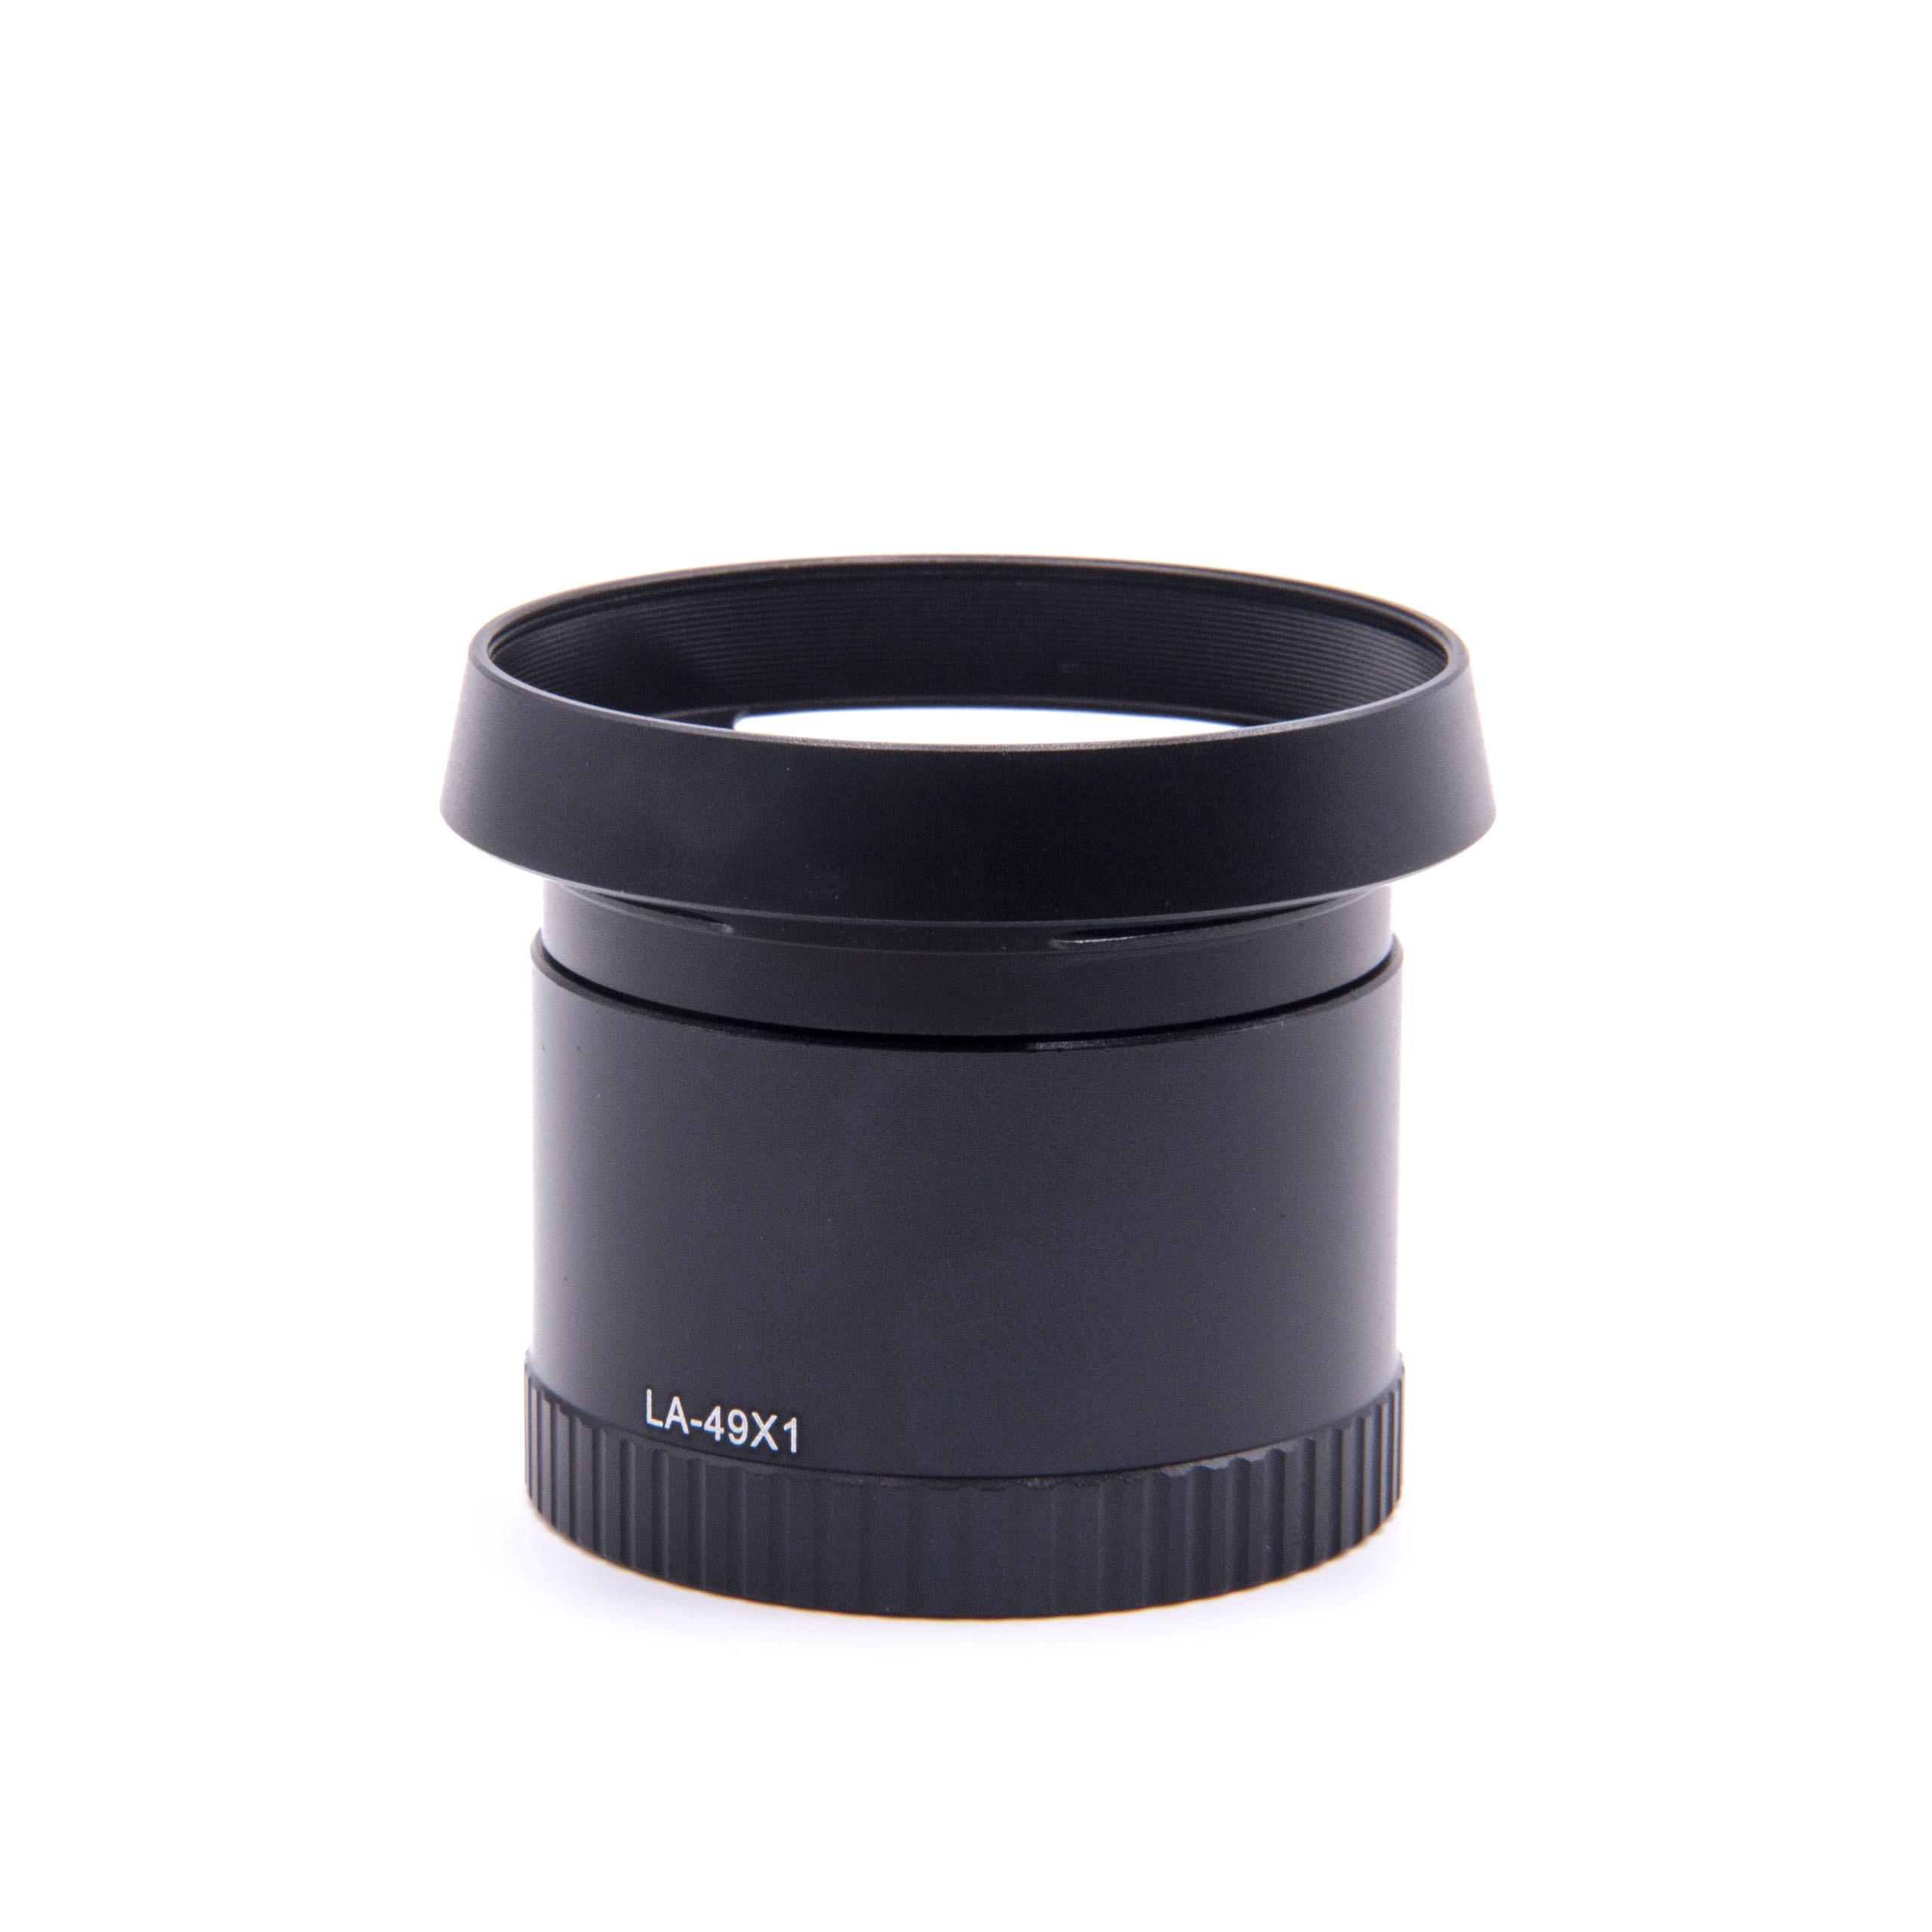 49 mm Filter Adapter, Tubular suitable for Leica X1, X2 Camera Lens